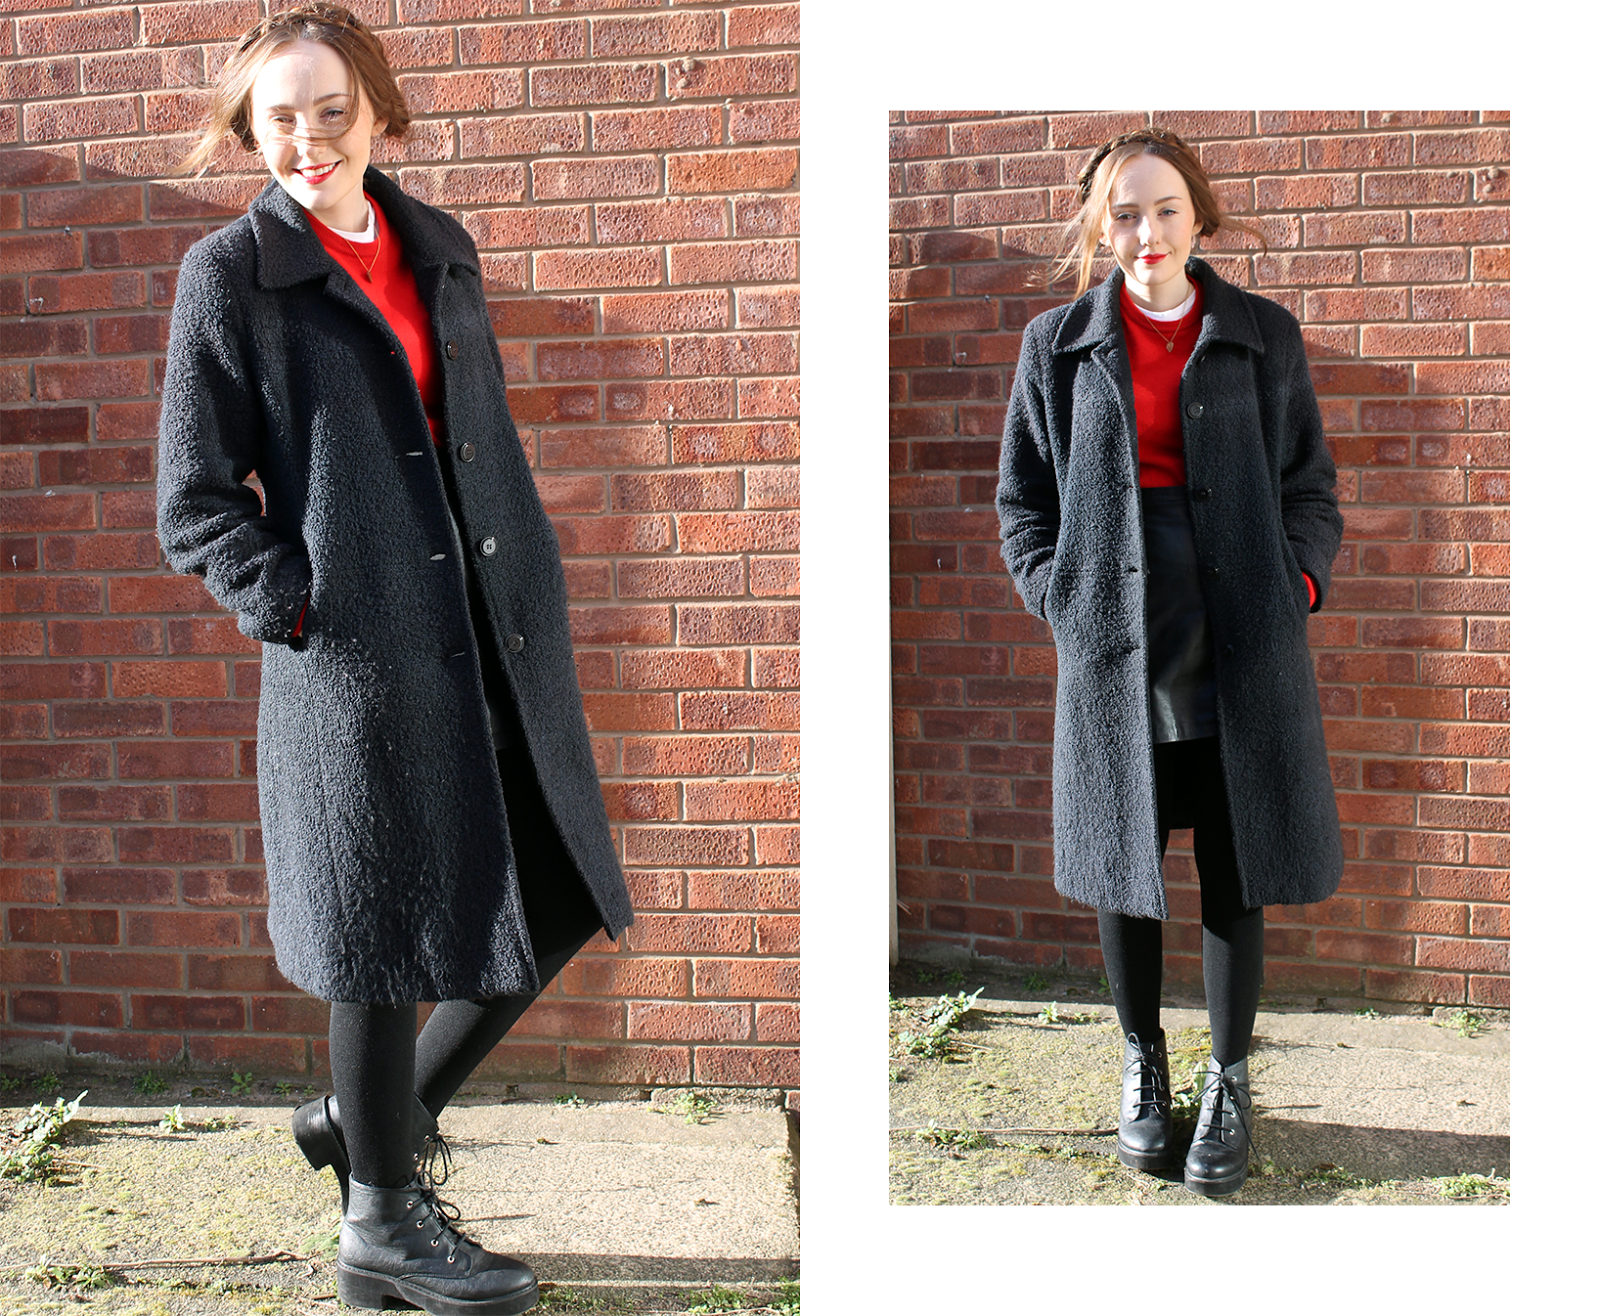 OOTD featuring bold red cashmere jumper and matching red lipstick, long grey boucle coat, leather a line skirt and asos revolution ankle boots